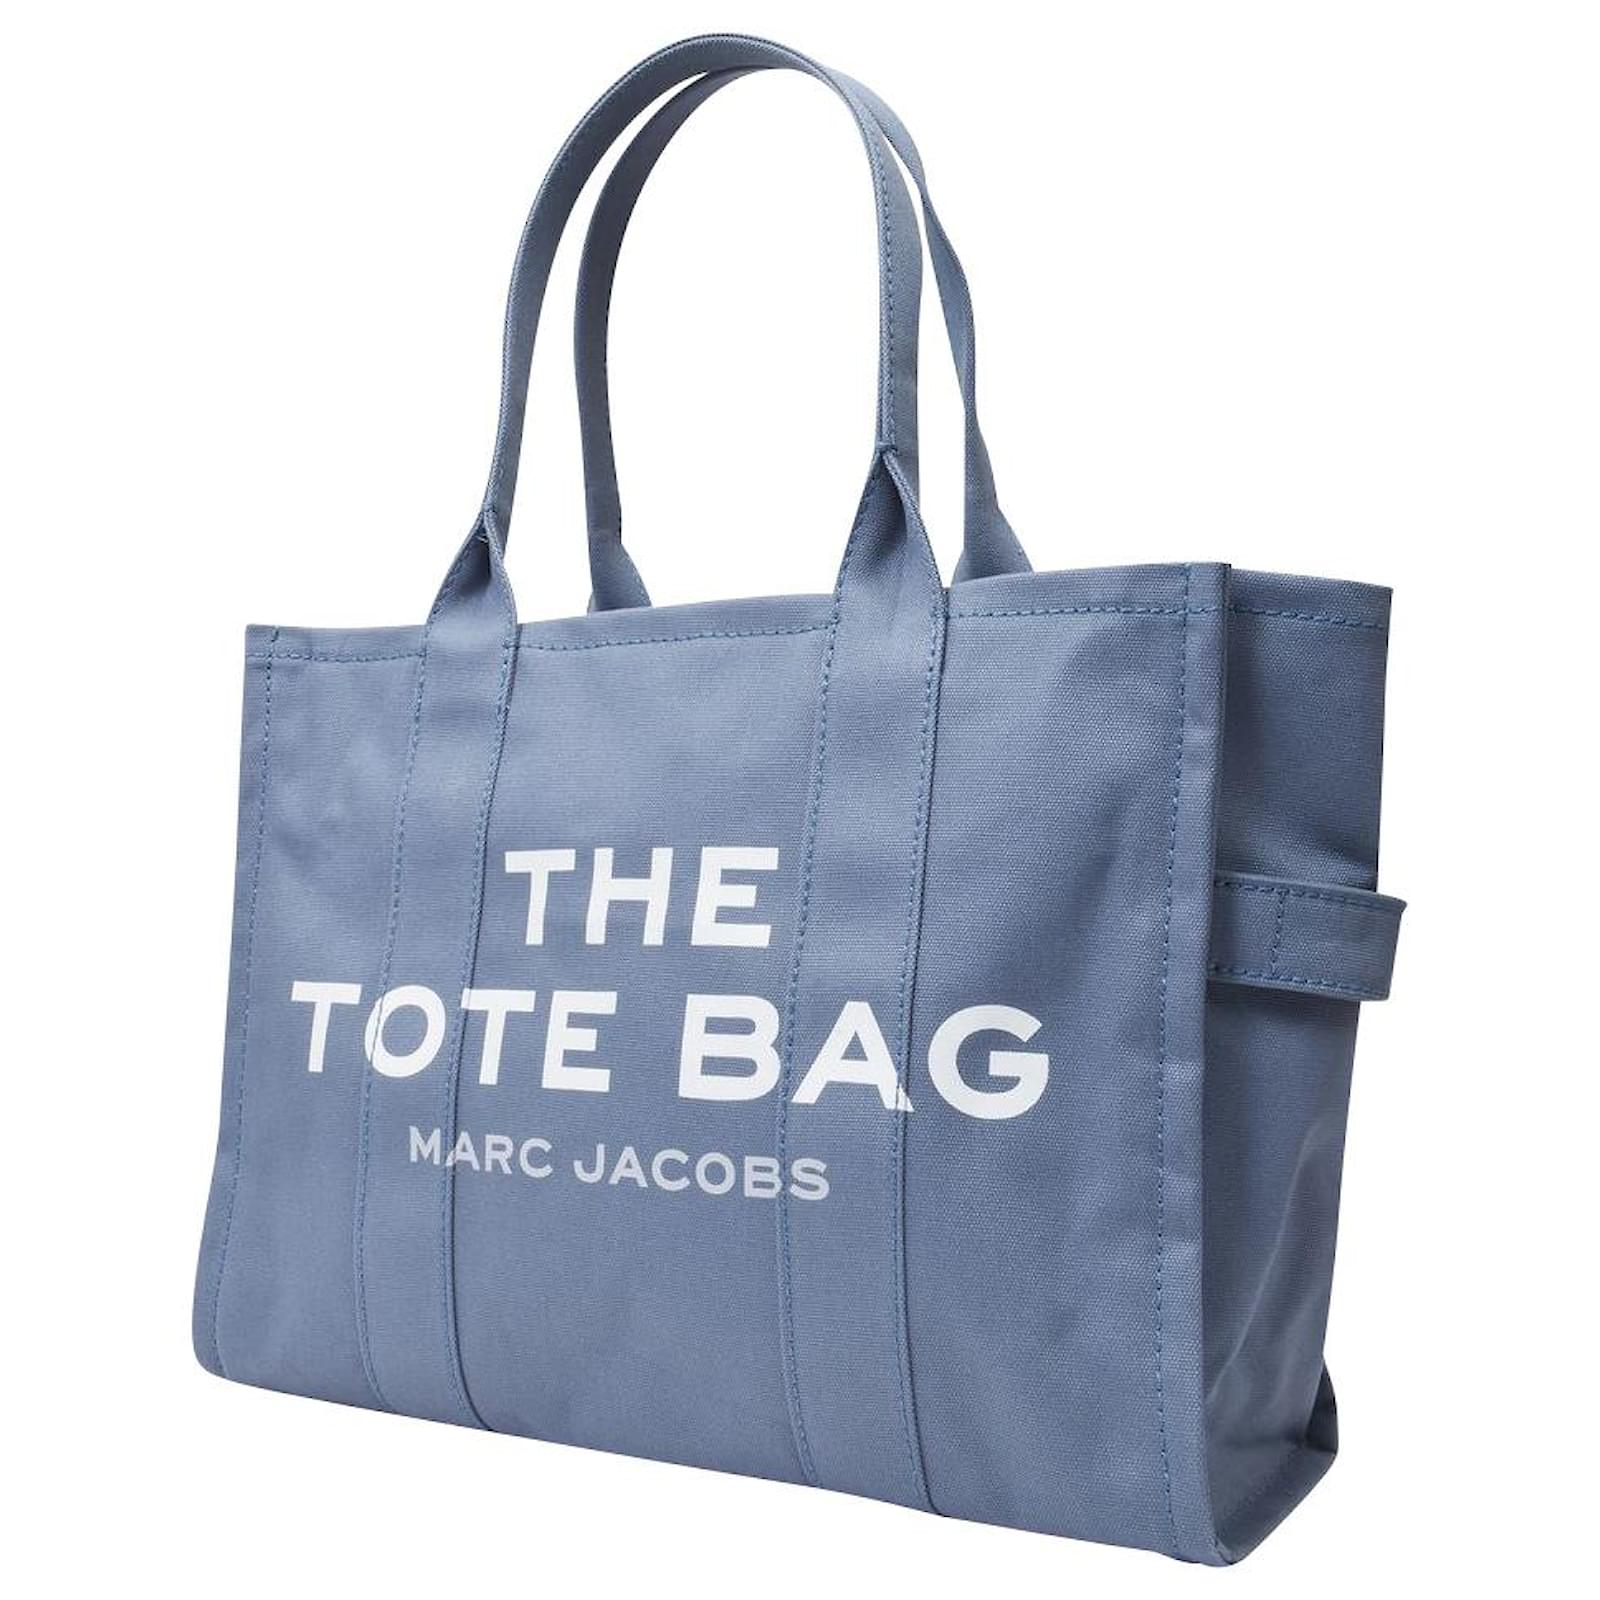 Marc jacobs large the tote bag! 